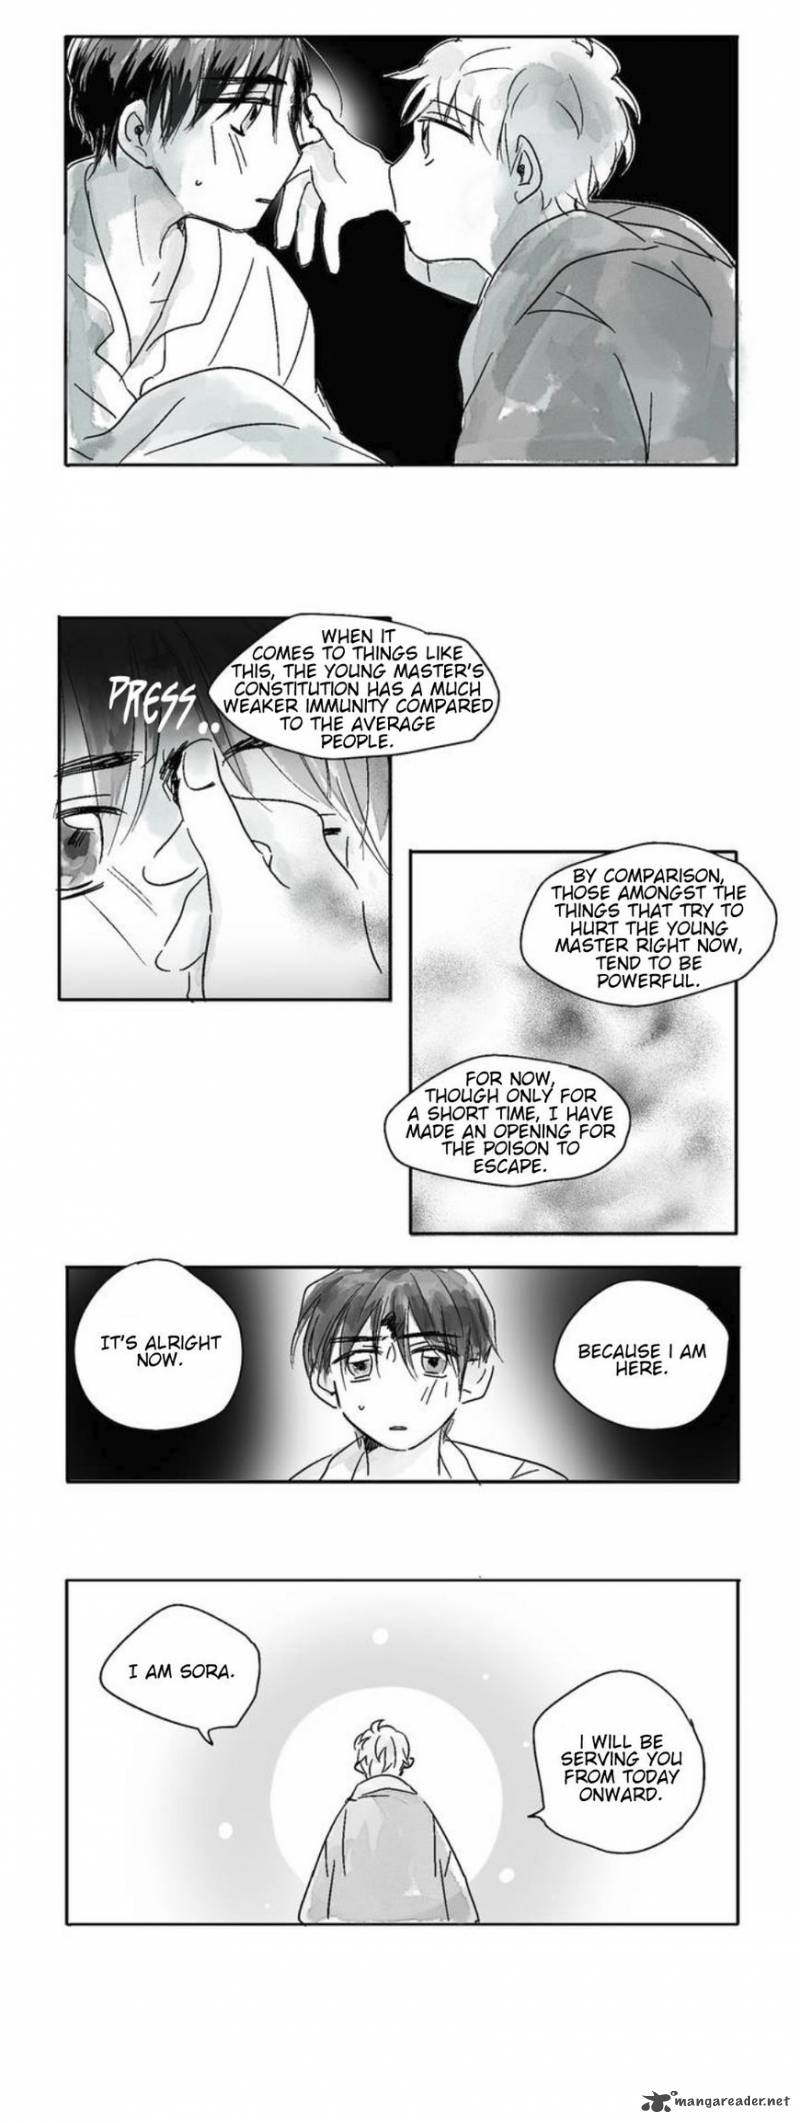 The Eyes Of Sora Chapter 1 Page 13